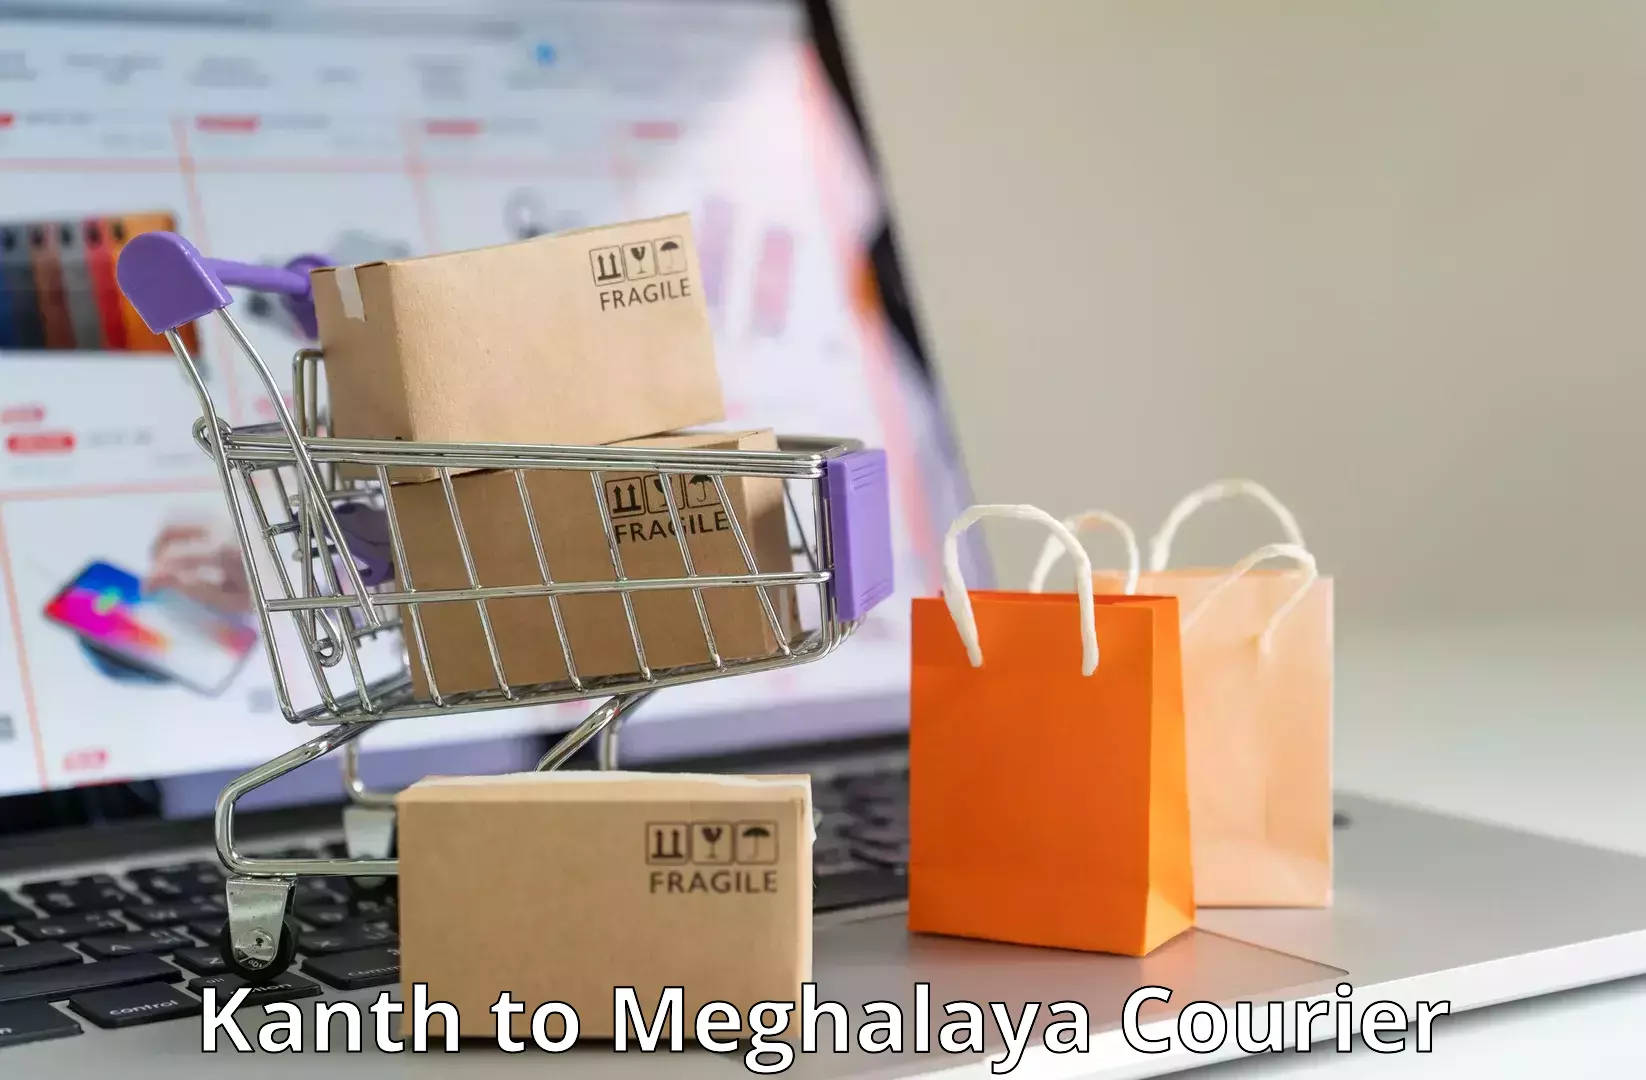 Subscription-based courier Kanth to Meghalaya